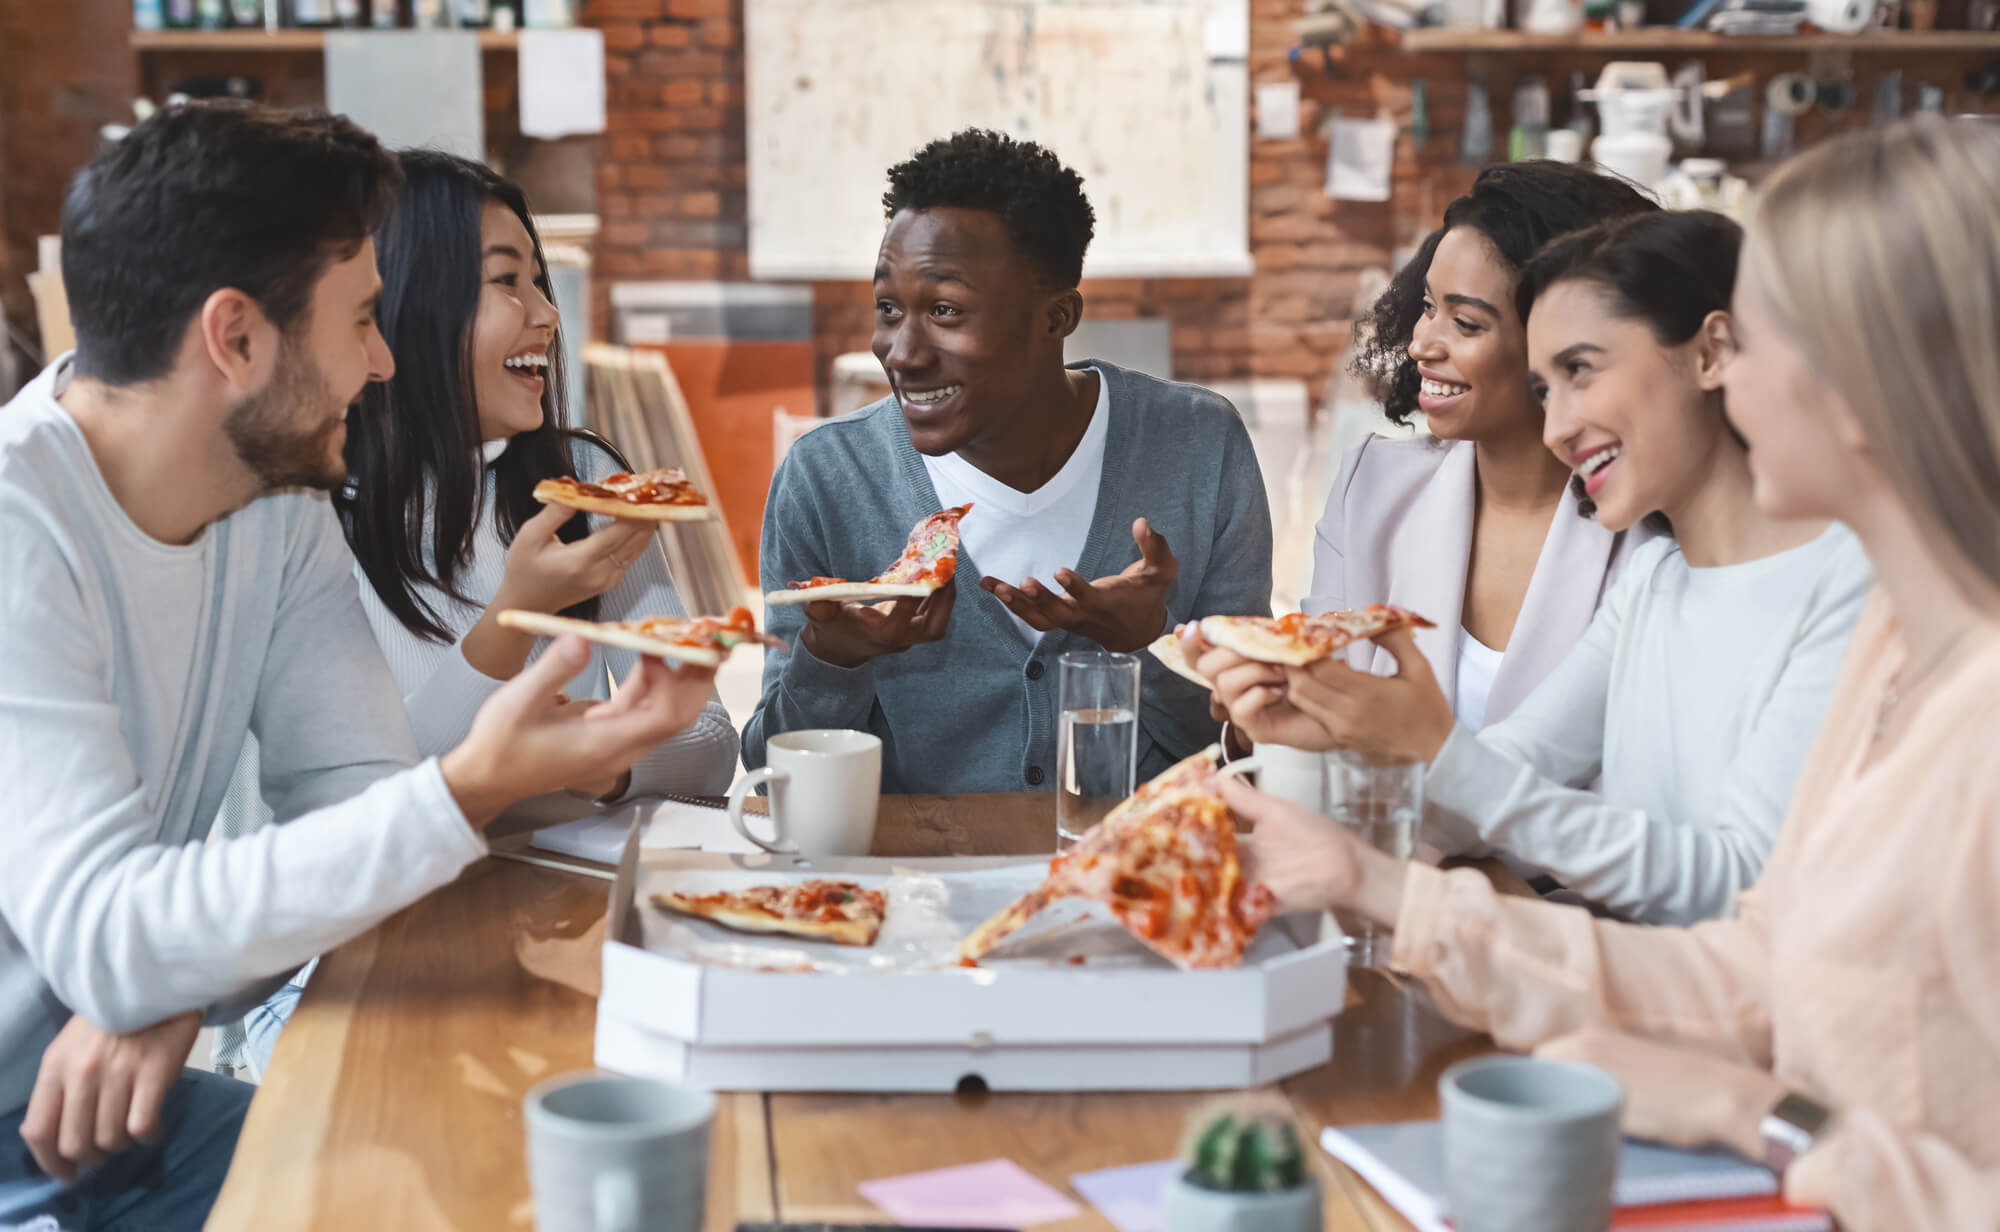 Friends enjoying pizza together.